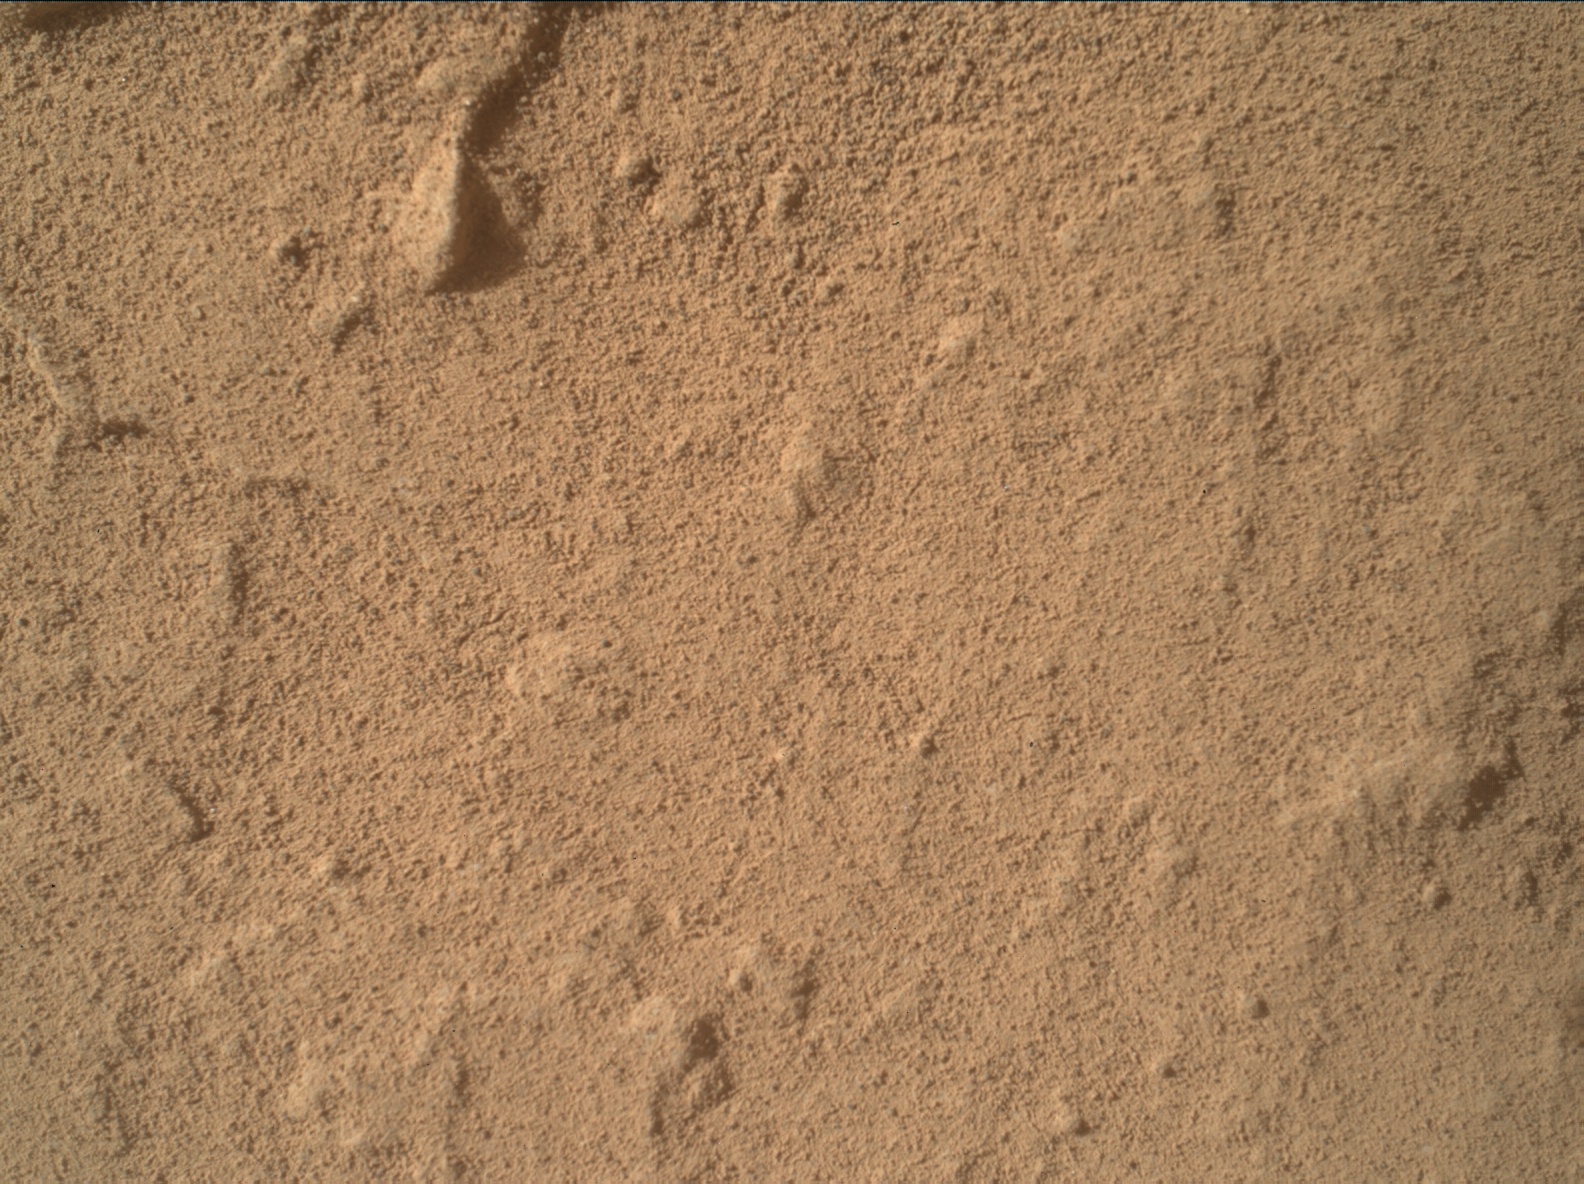 Nasa's Mars rover Curiosity acquired this image using its Mars Hand Lens Imager (MAHLI) on Sol 3092